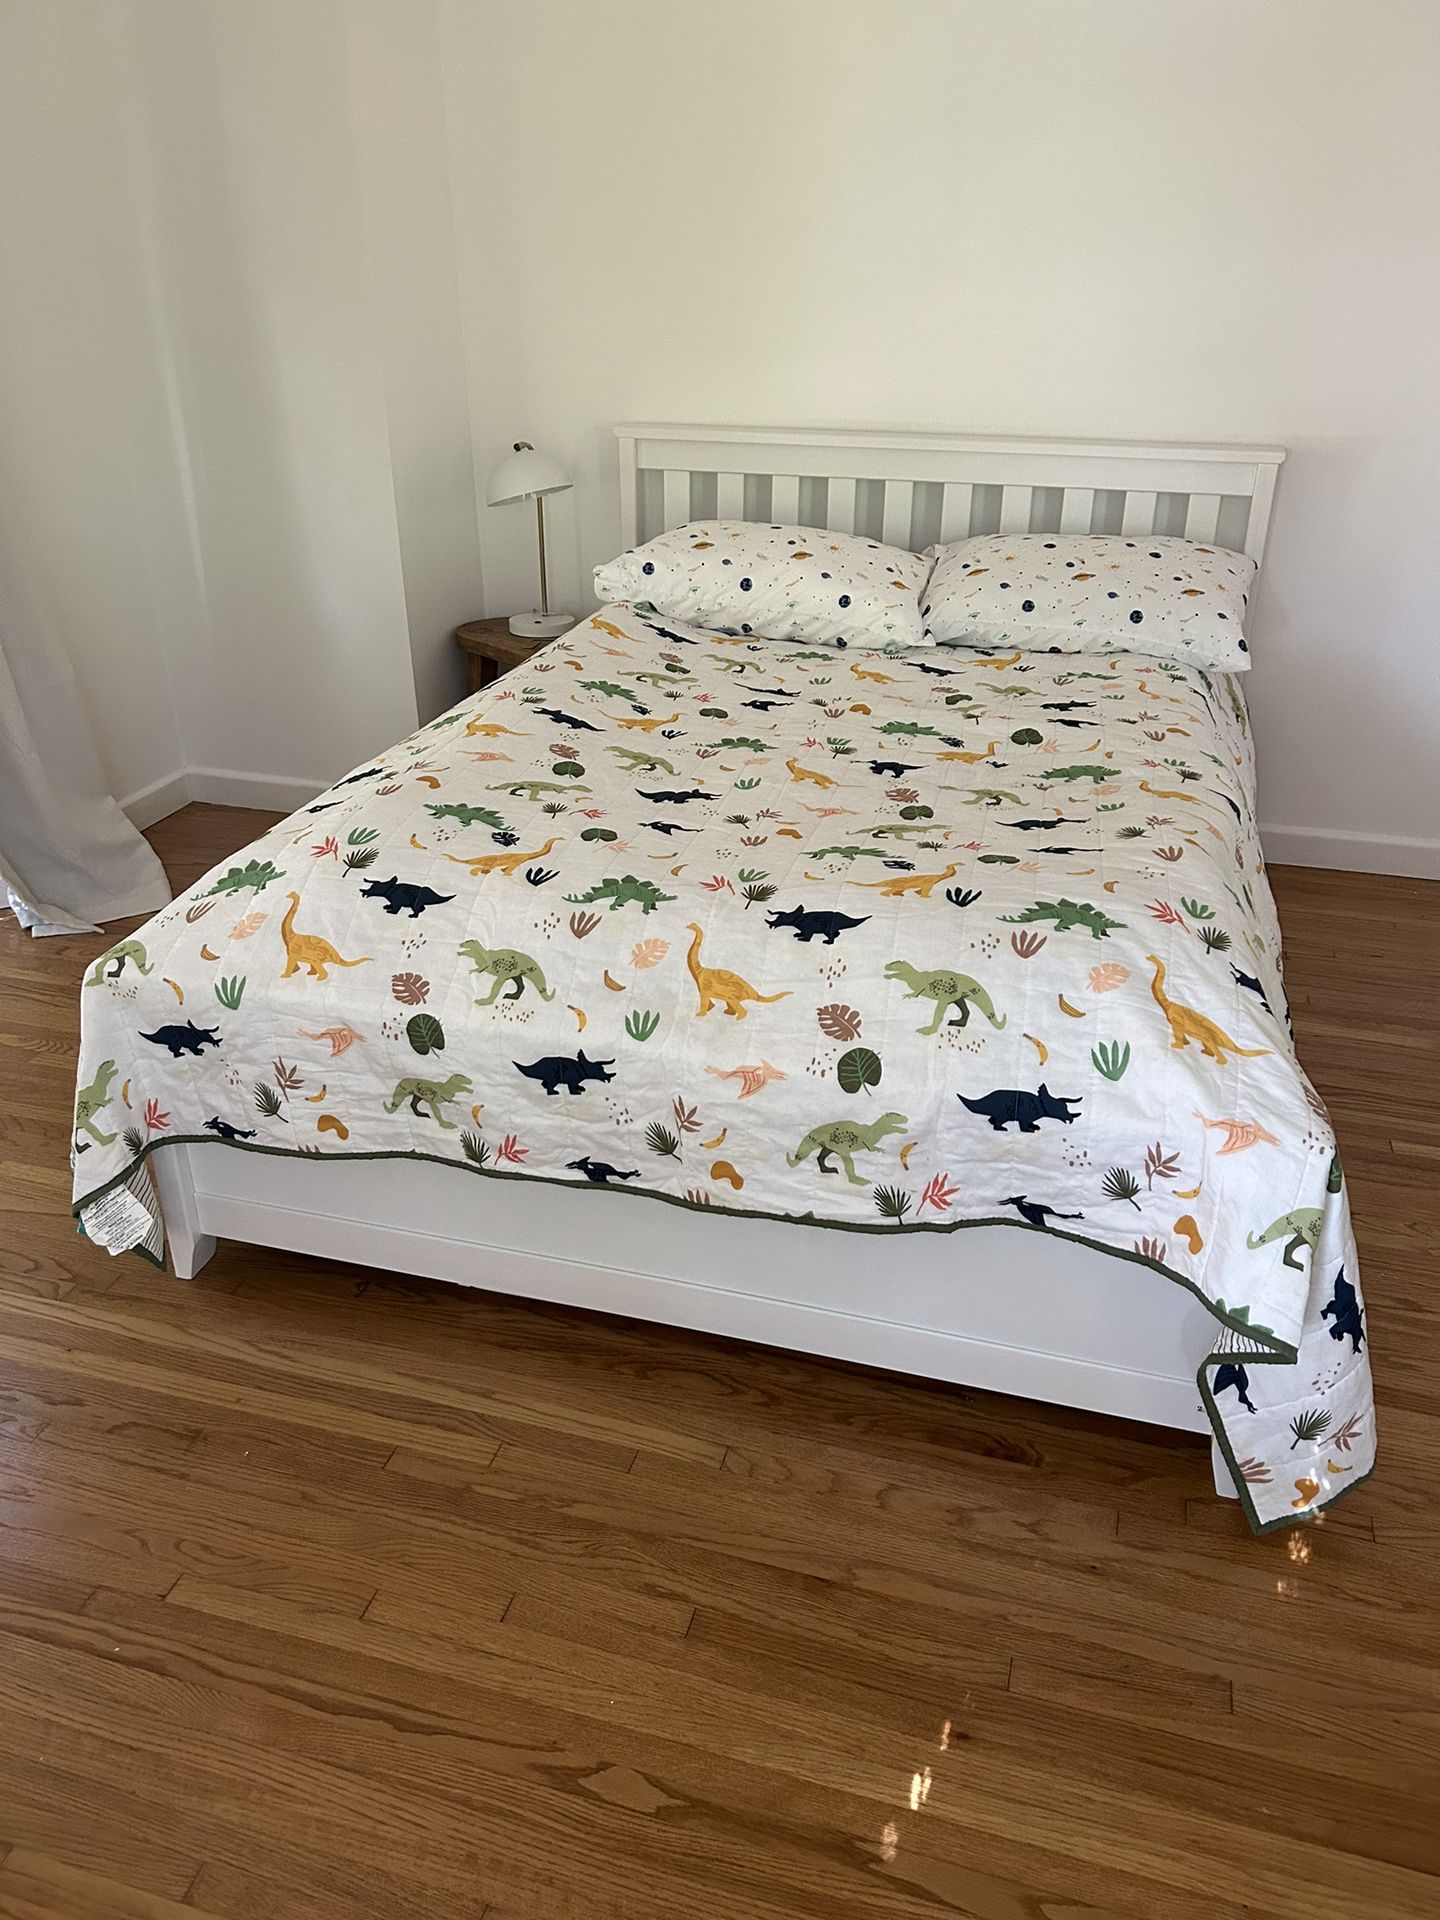 Brand New Queen Bed Frame And Mattress 